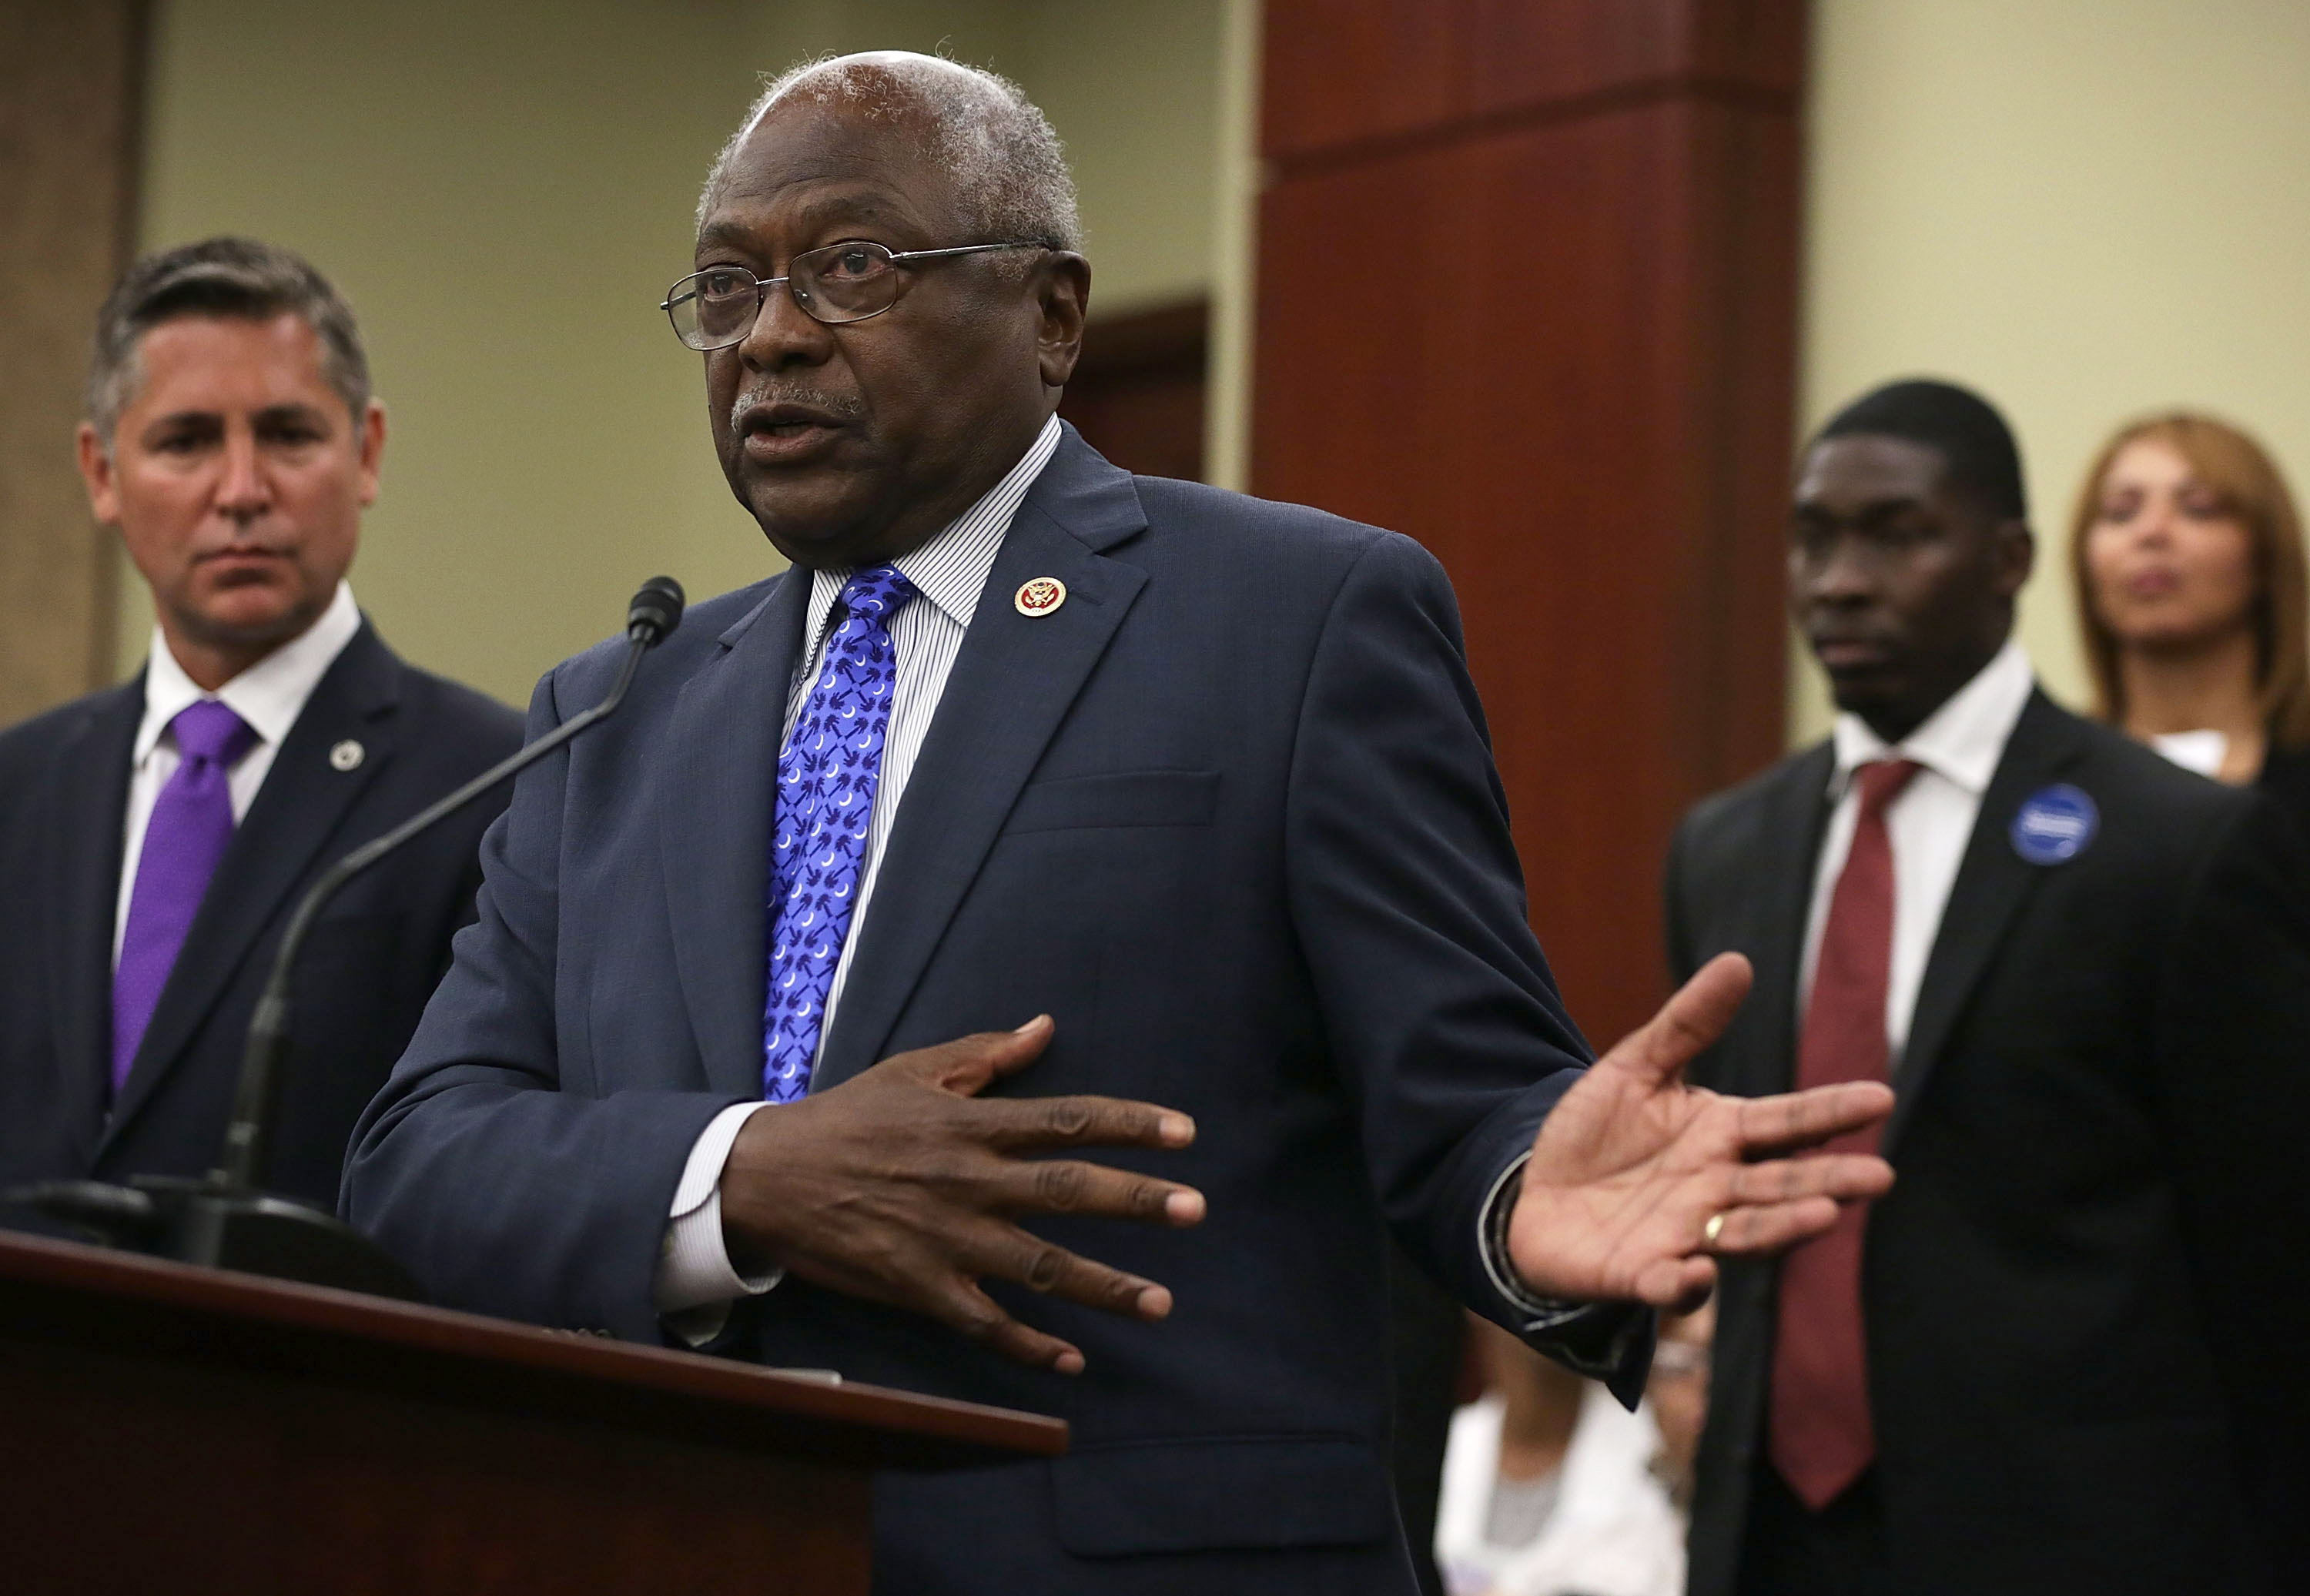 U.S. House Assistant Democratic Leader James Clyburn (D-SC) (2nd L) speaks as President of the Brady Campaign to Prevent Gun Violence Dan Gross, and Andre Duncan (3rd L), nephew of Myra Thompson, one of the victims of the June 17 shooting at the Emanuel AME Church in Charleston, S.C., listen during a news conference July 8, 2015 on Capitol Hill in Washington, DC. 
                       (Alex Wong--Getty Images) (Alex Wong&mdash;Getty Images)